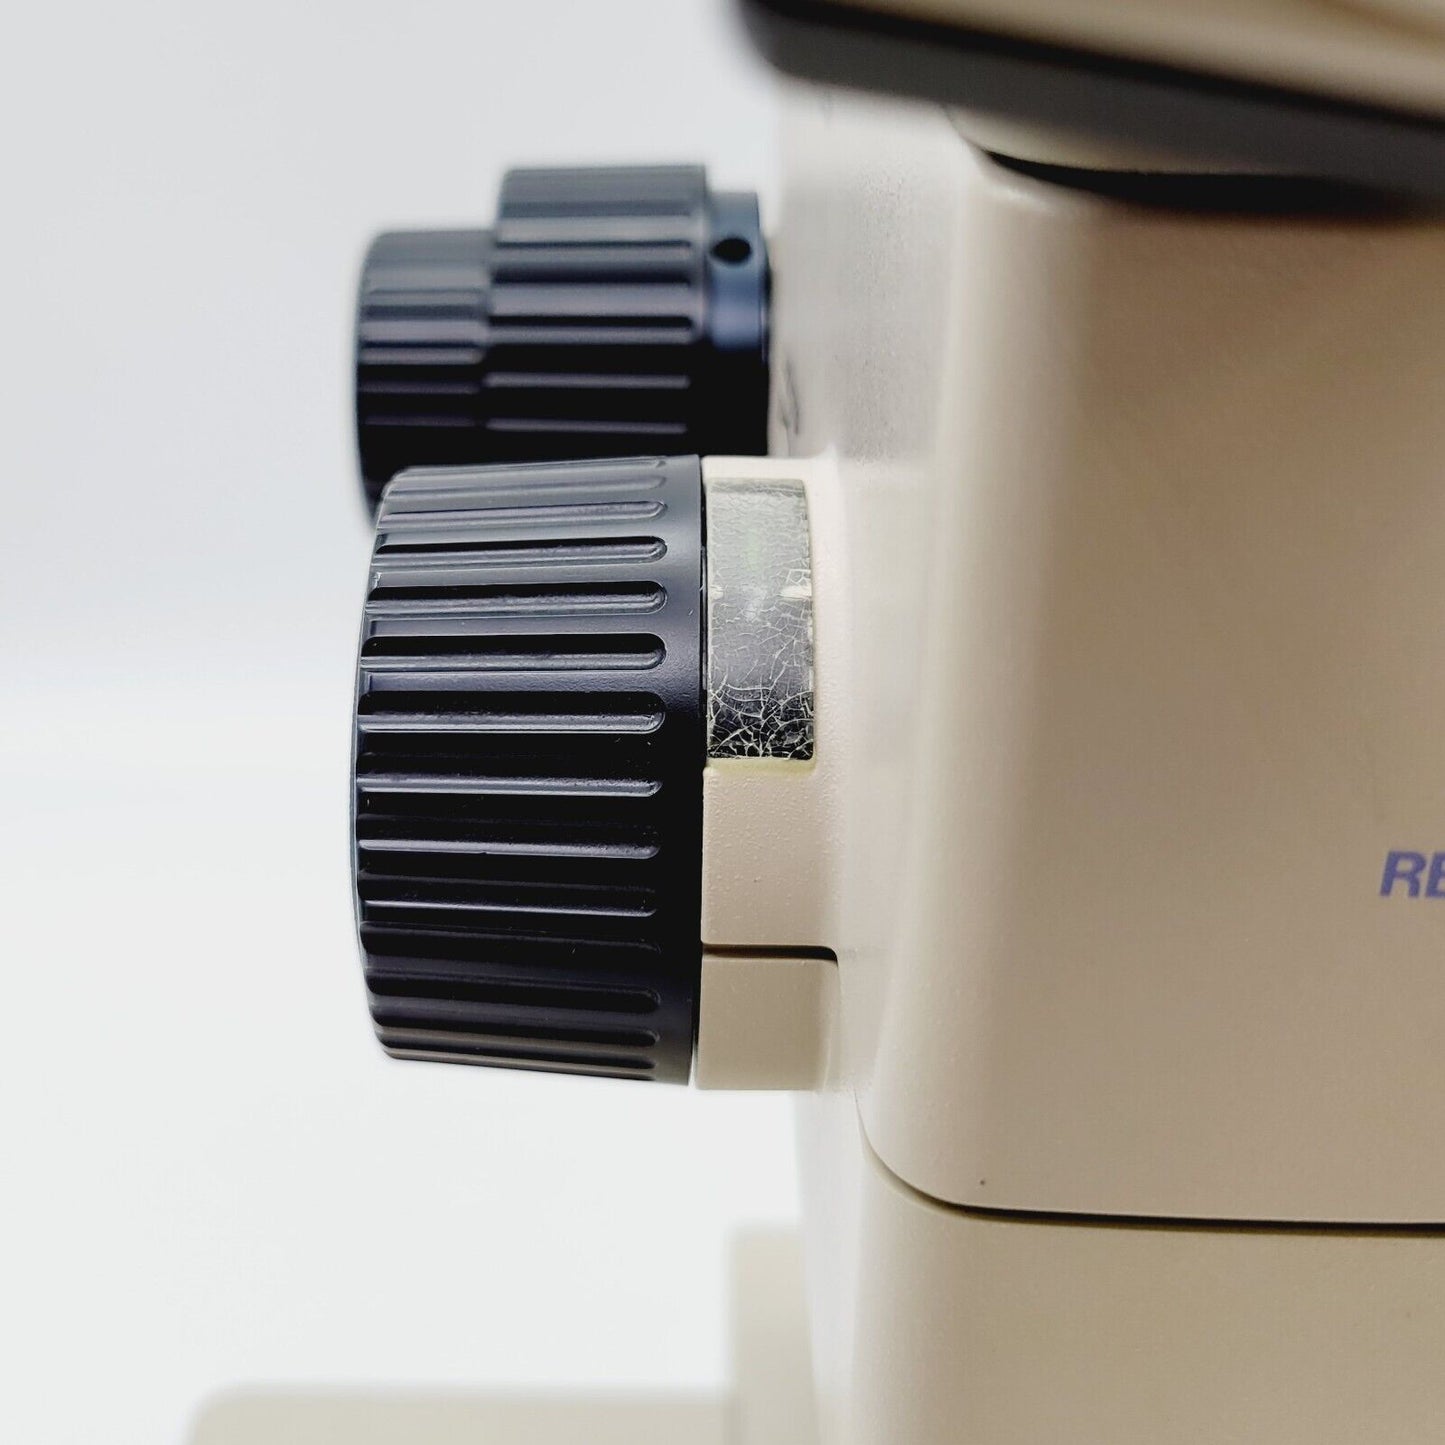 Olympus Stereo Microscope SZH10 with BF/DF Transmitted Light Stand - microscopemarketplace